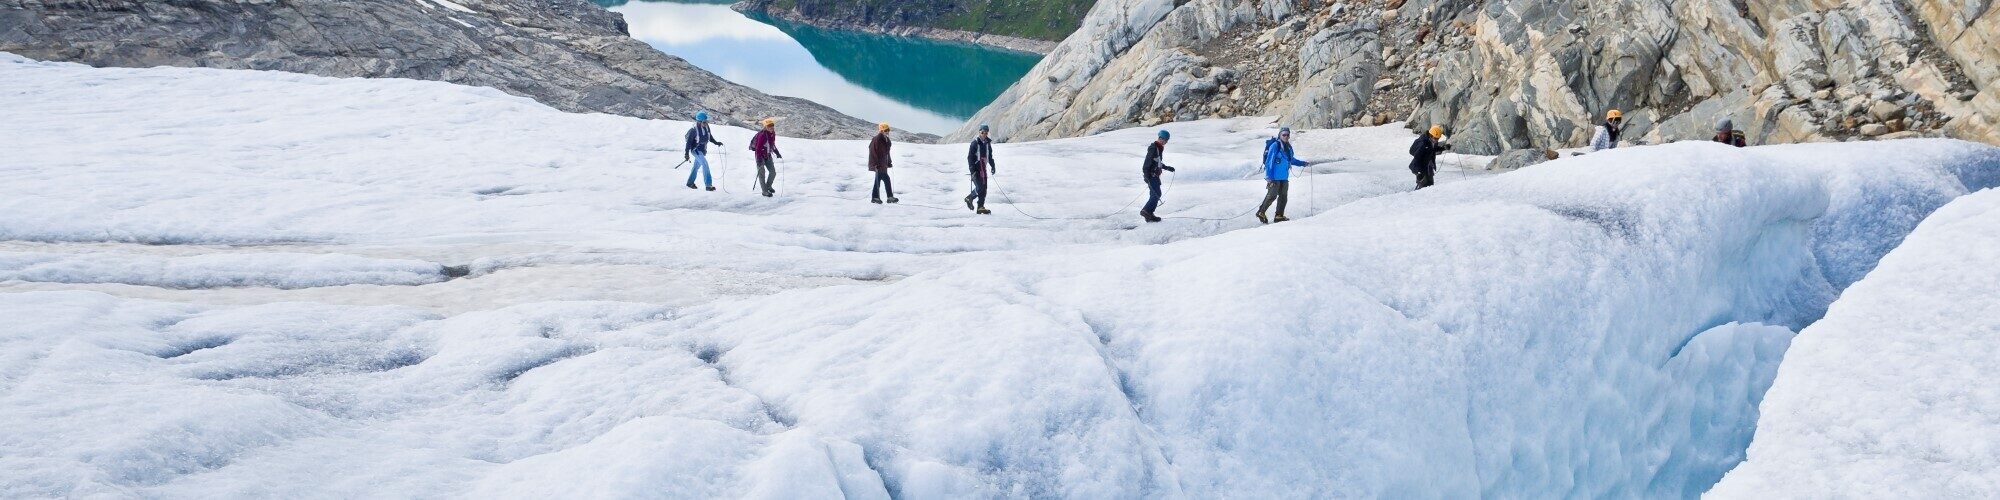 A group of seven people walking on a glacier with lake in the background.